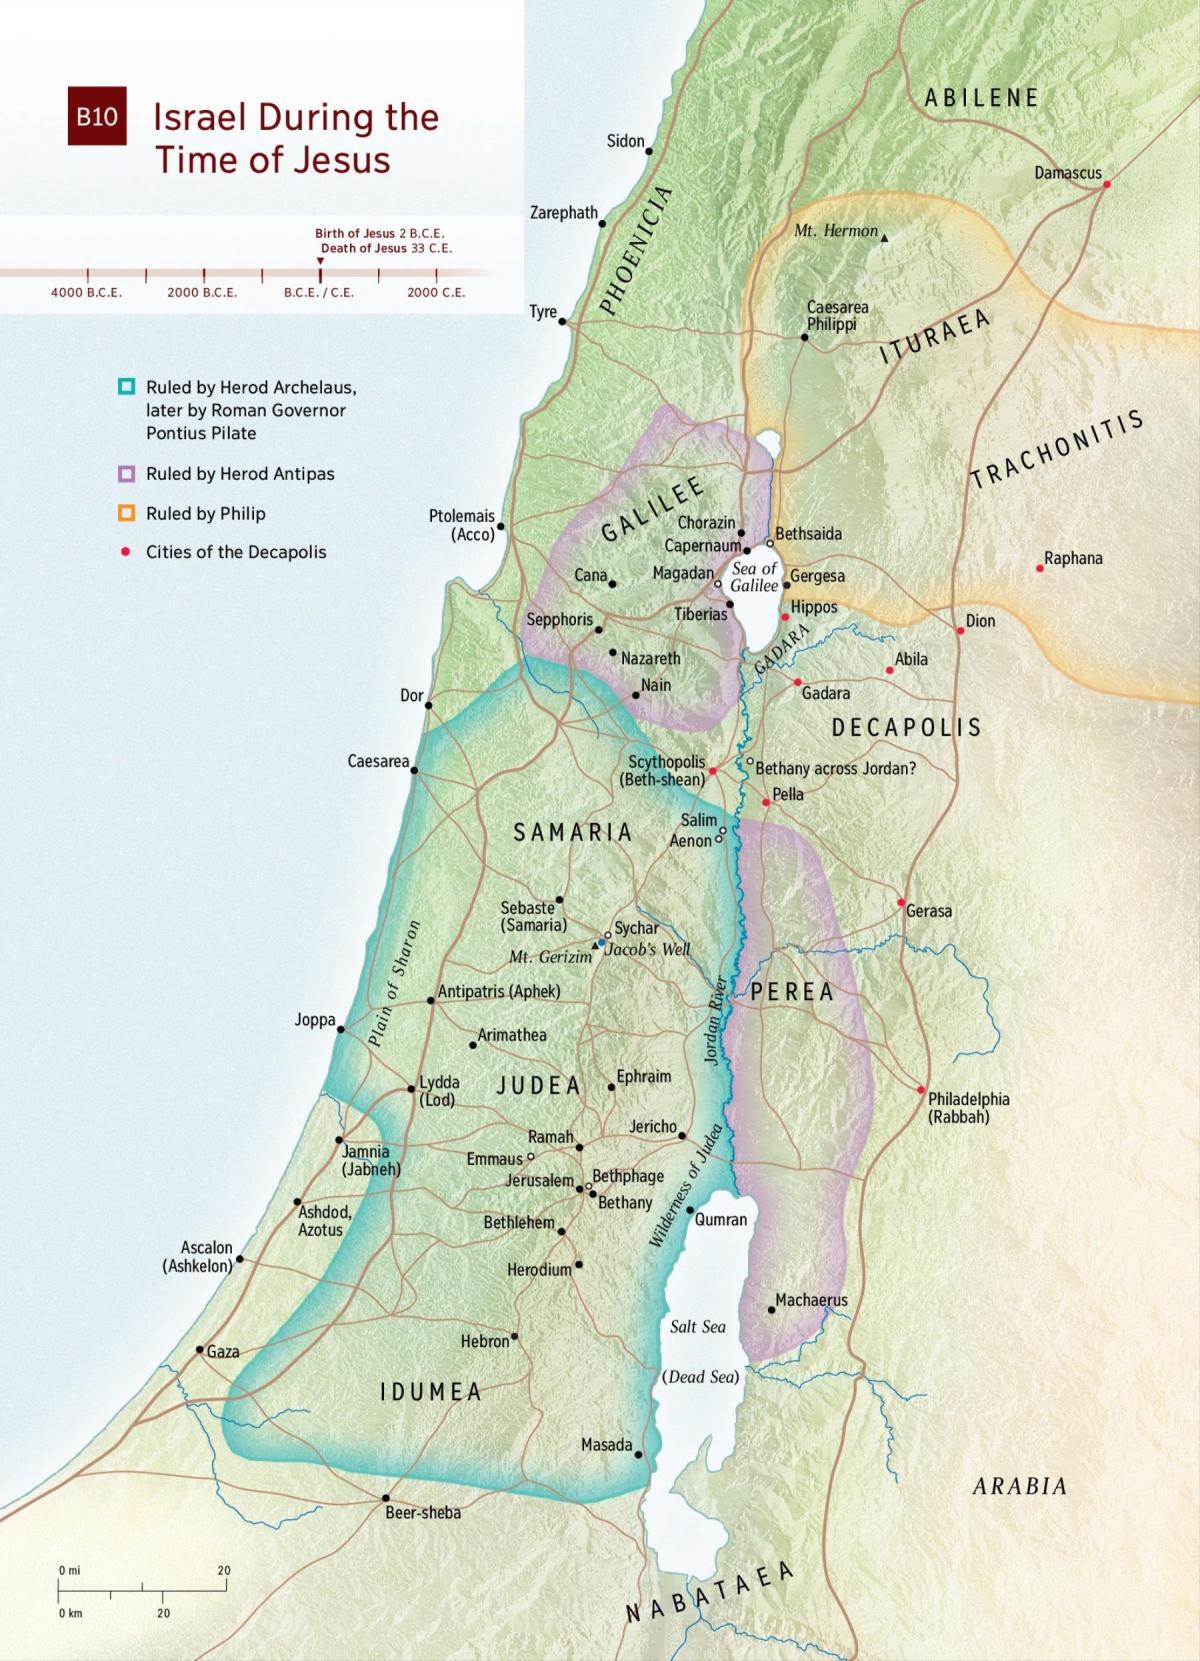 map of the Holy land in the time of Jesus